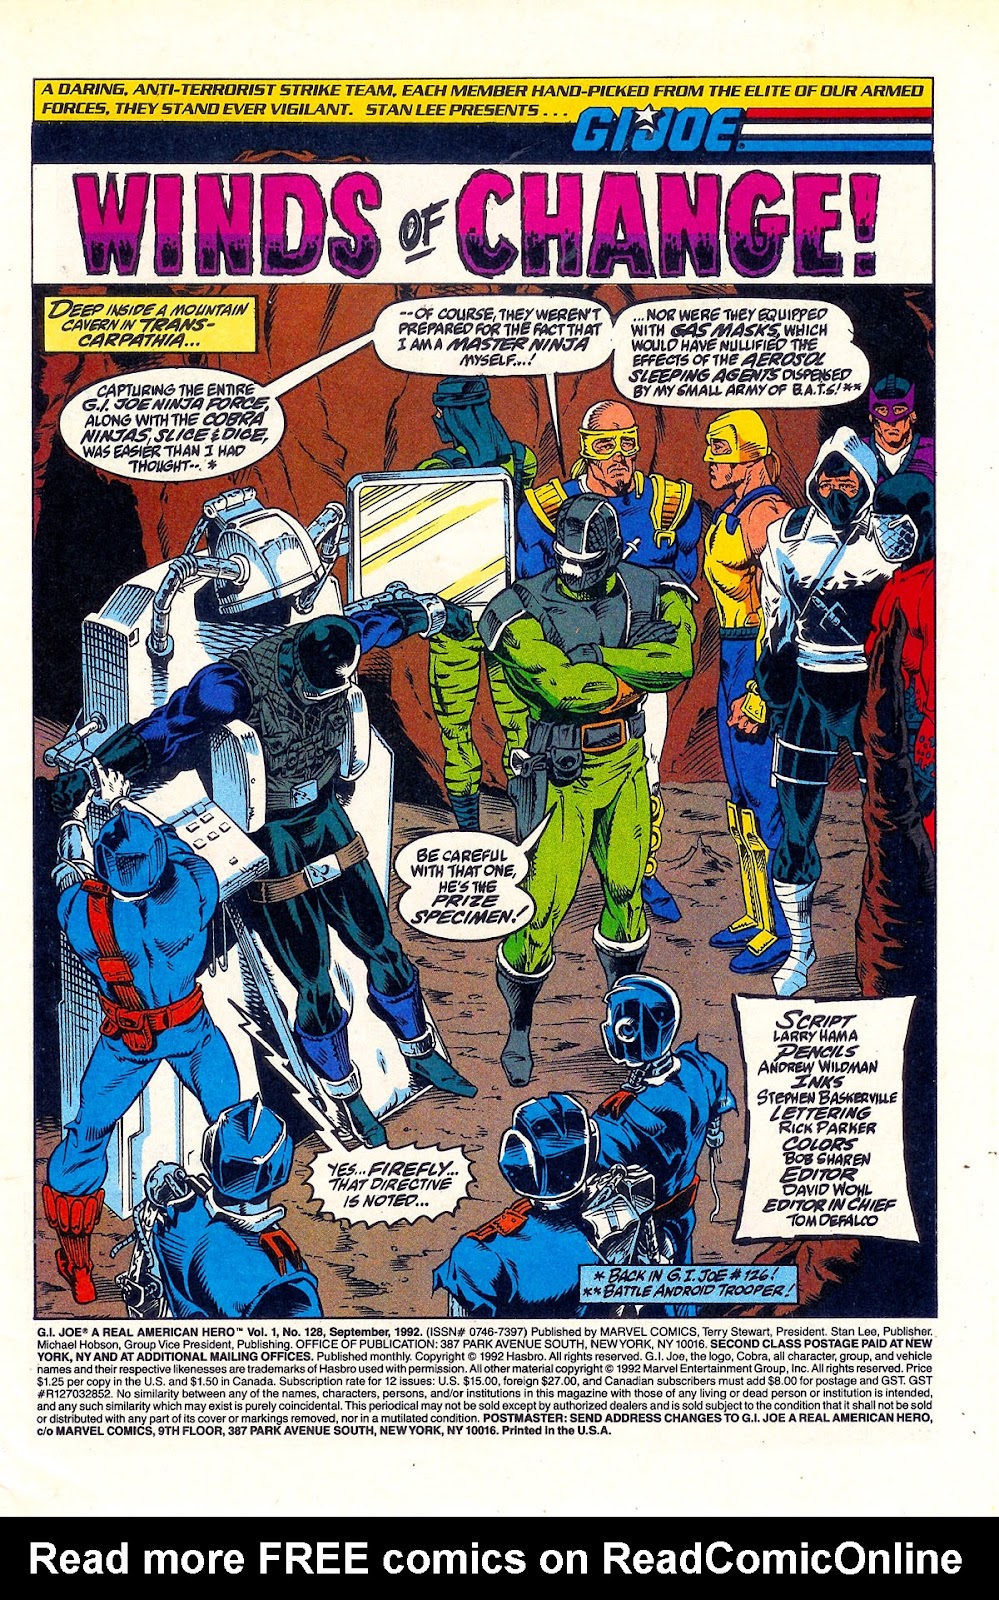 G.I. Joe: A Real American Hero issue 128 - Page 2